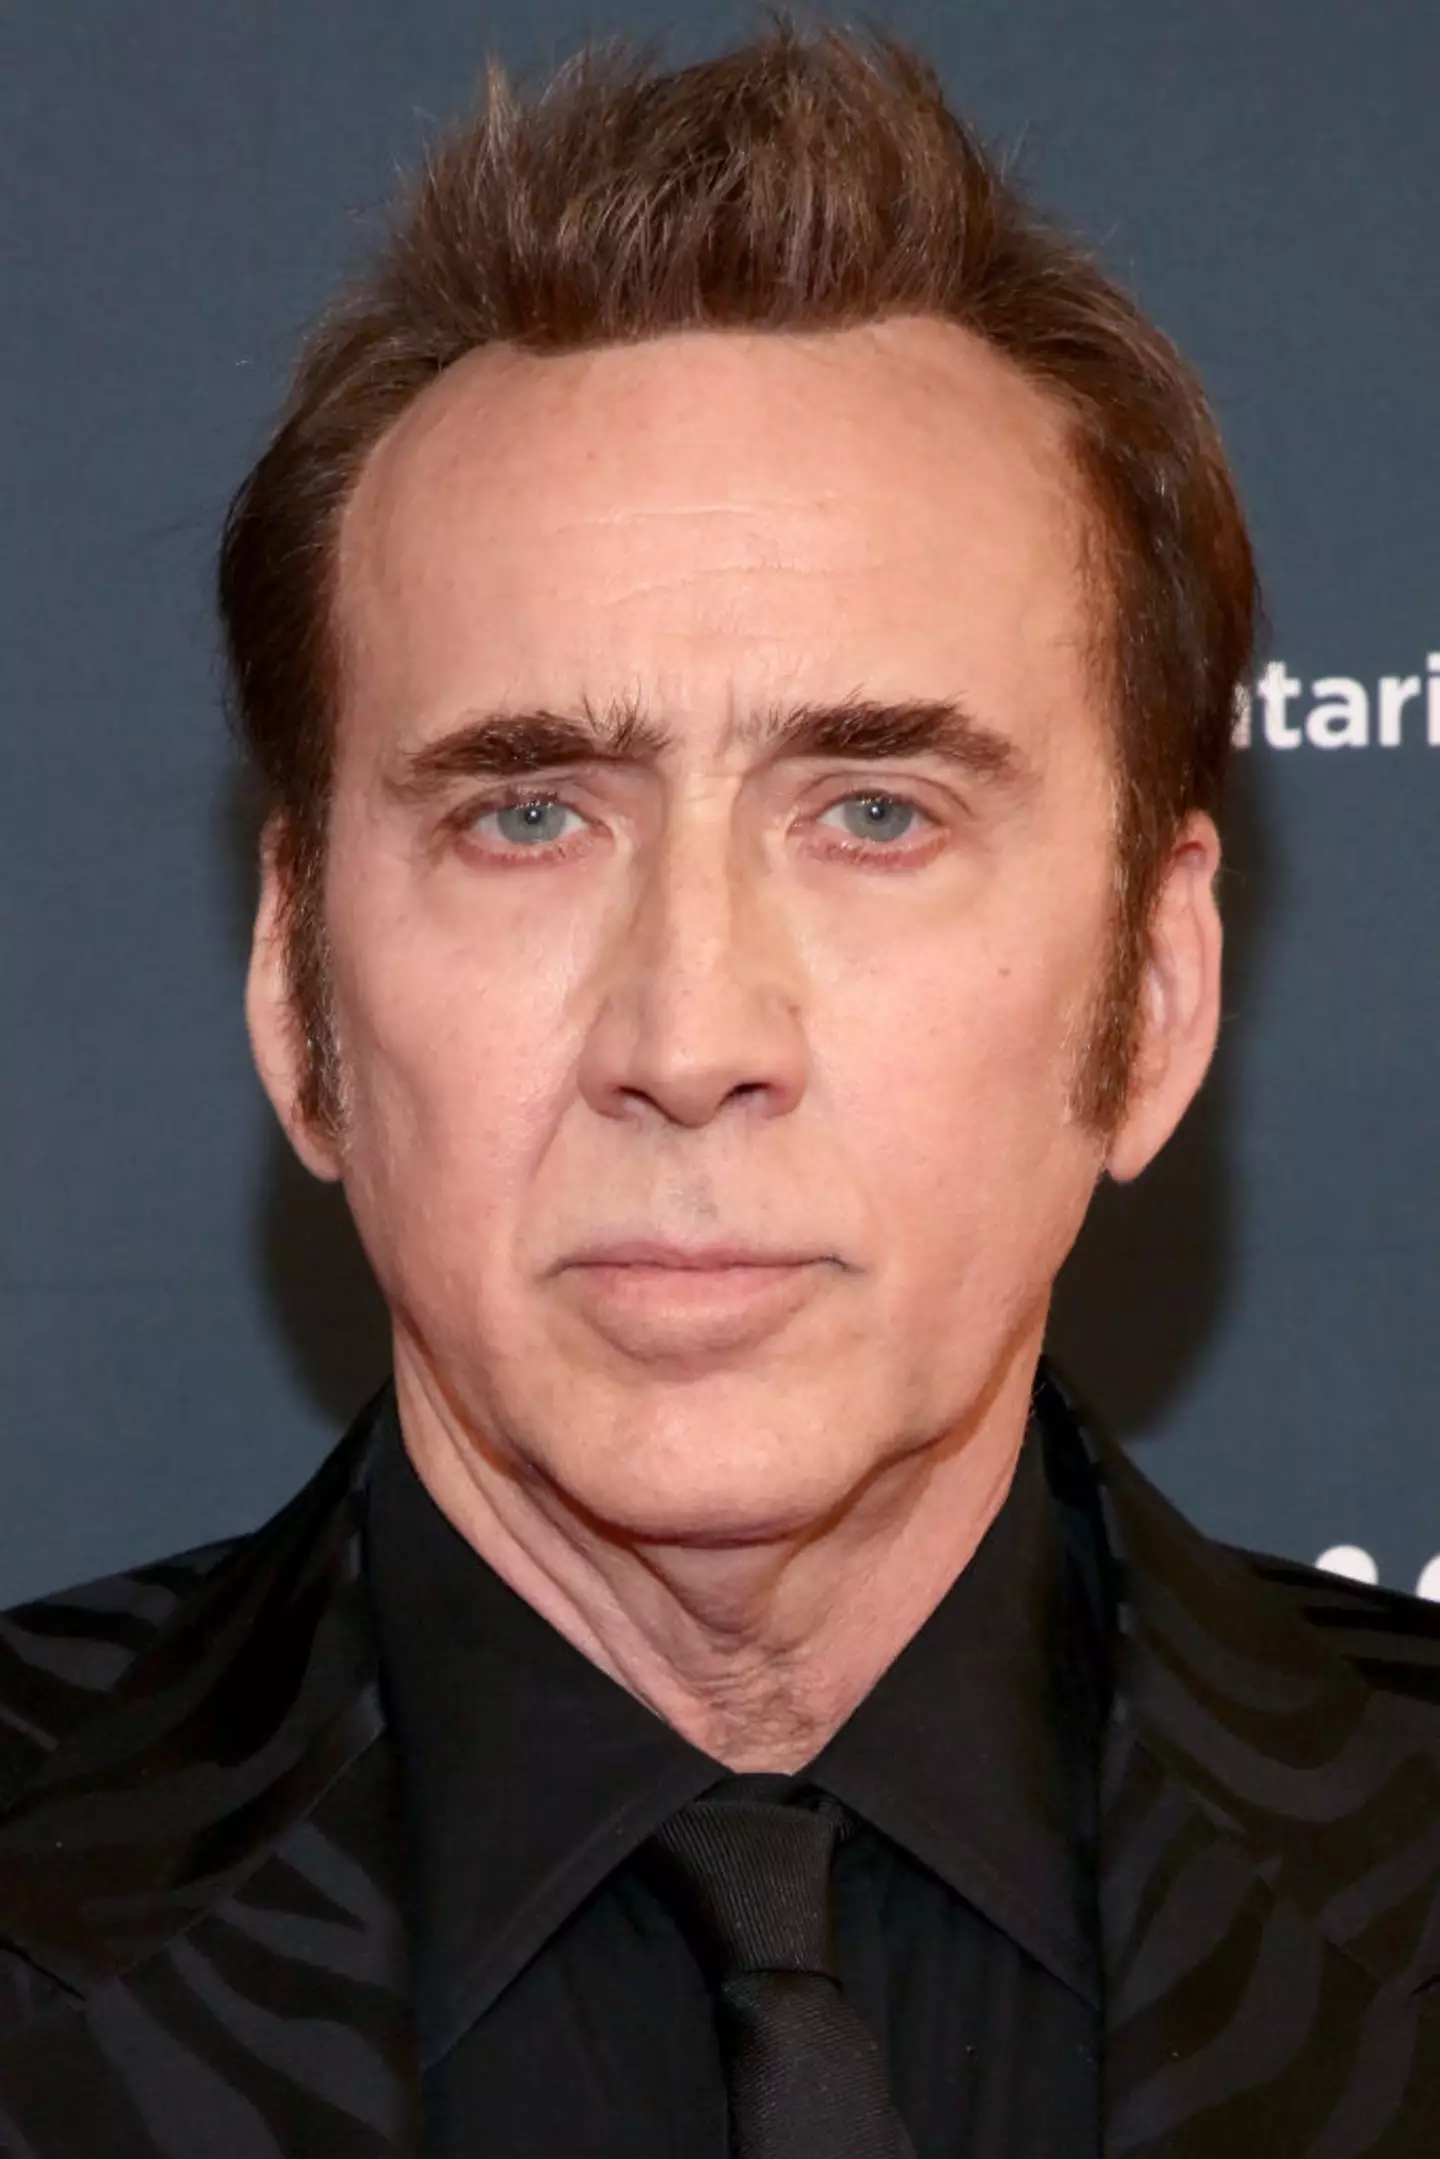 Nicolas Cage has said he is planning to step back from movies.